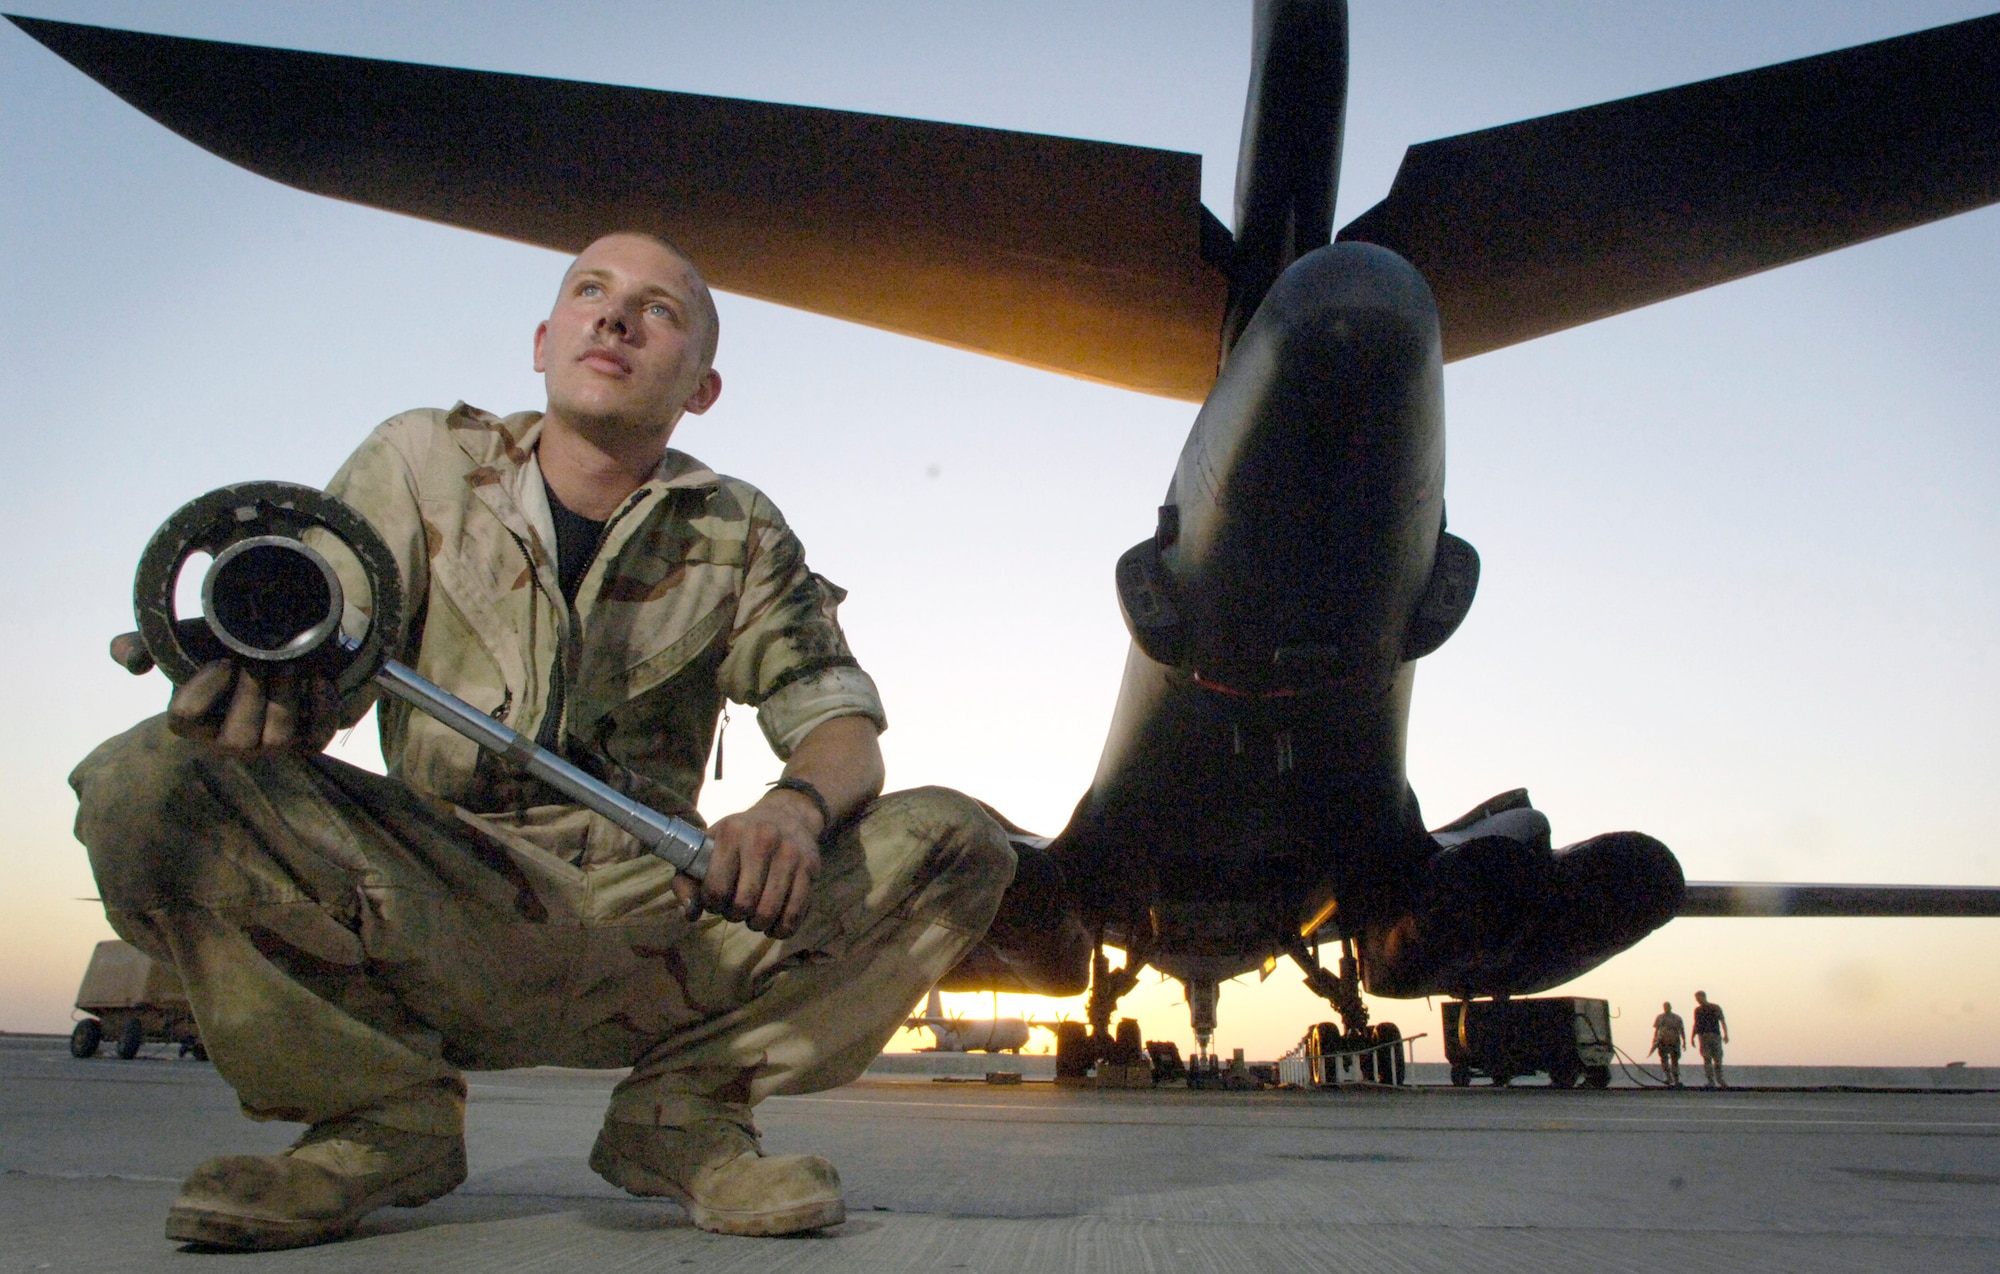 Airman 1st Class Jonathan Termun is a B-1 crew chief assigned to the 28th Aircraft Maintenance Squadron at Ellsworth Air Force Base, S.D. He is deployed to Southwest Asia in support of operations Iraqi Freedom and Enduring Freedom. (U.S. Air Force photo/Master Sgt. Scott Wagers)